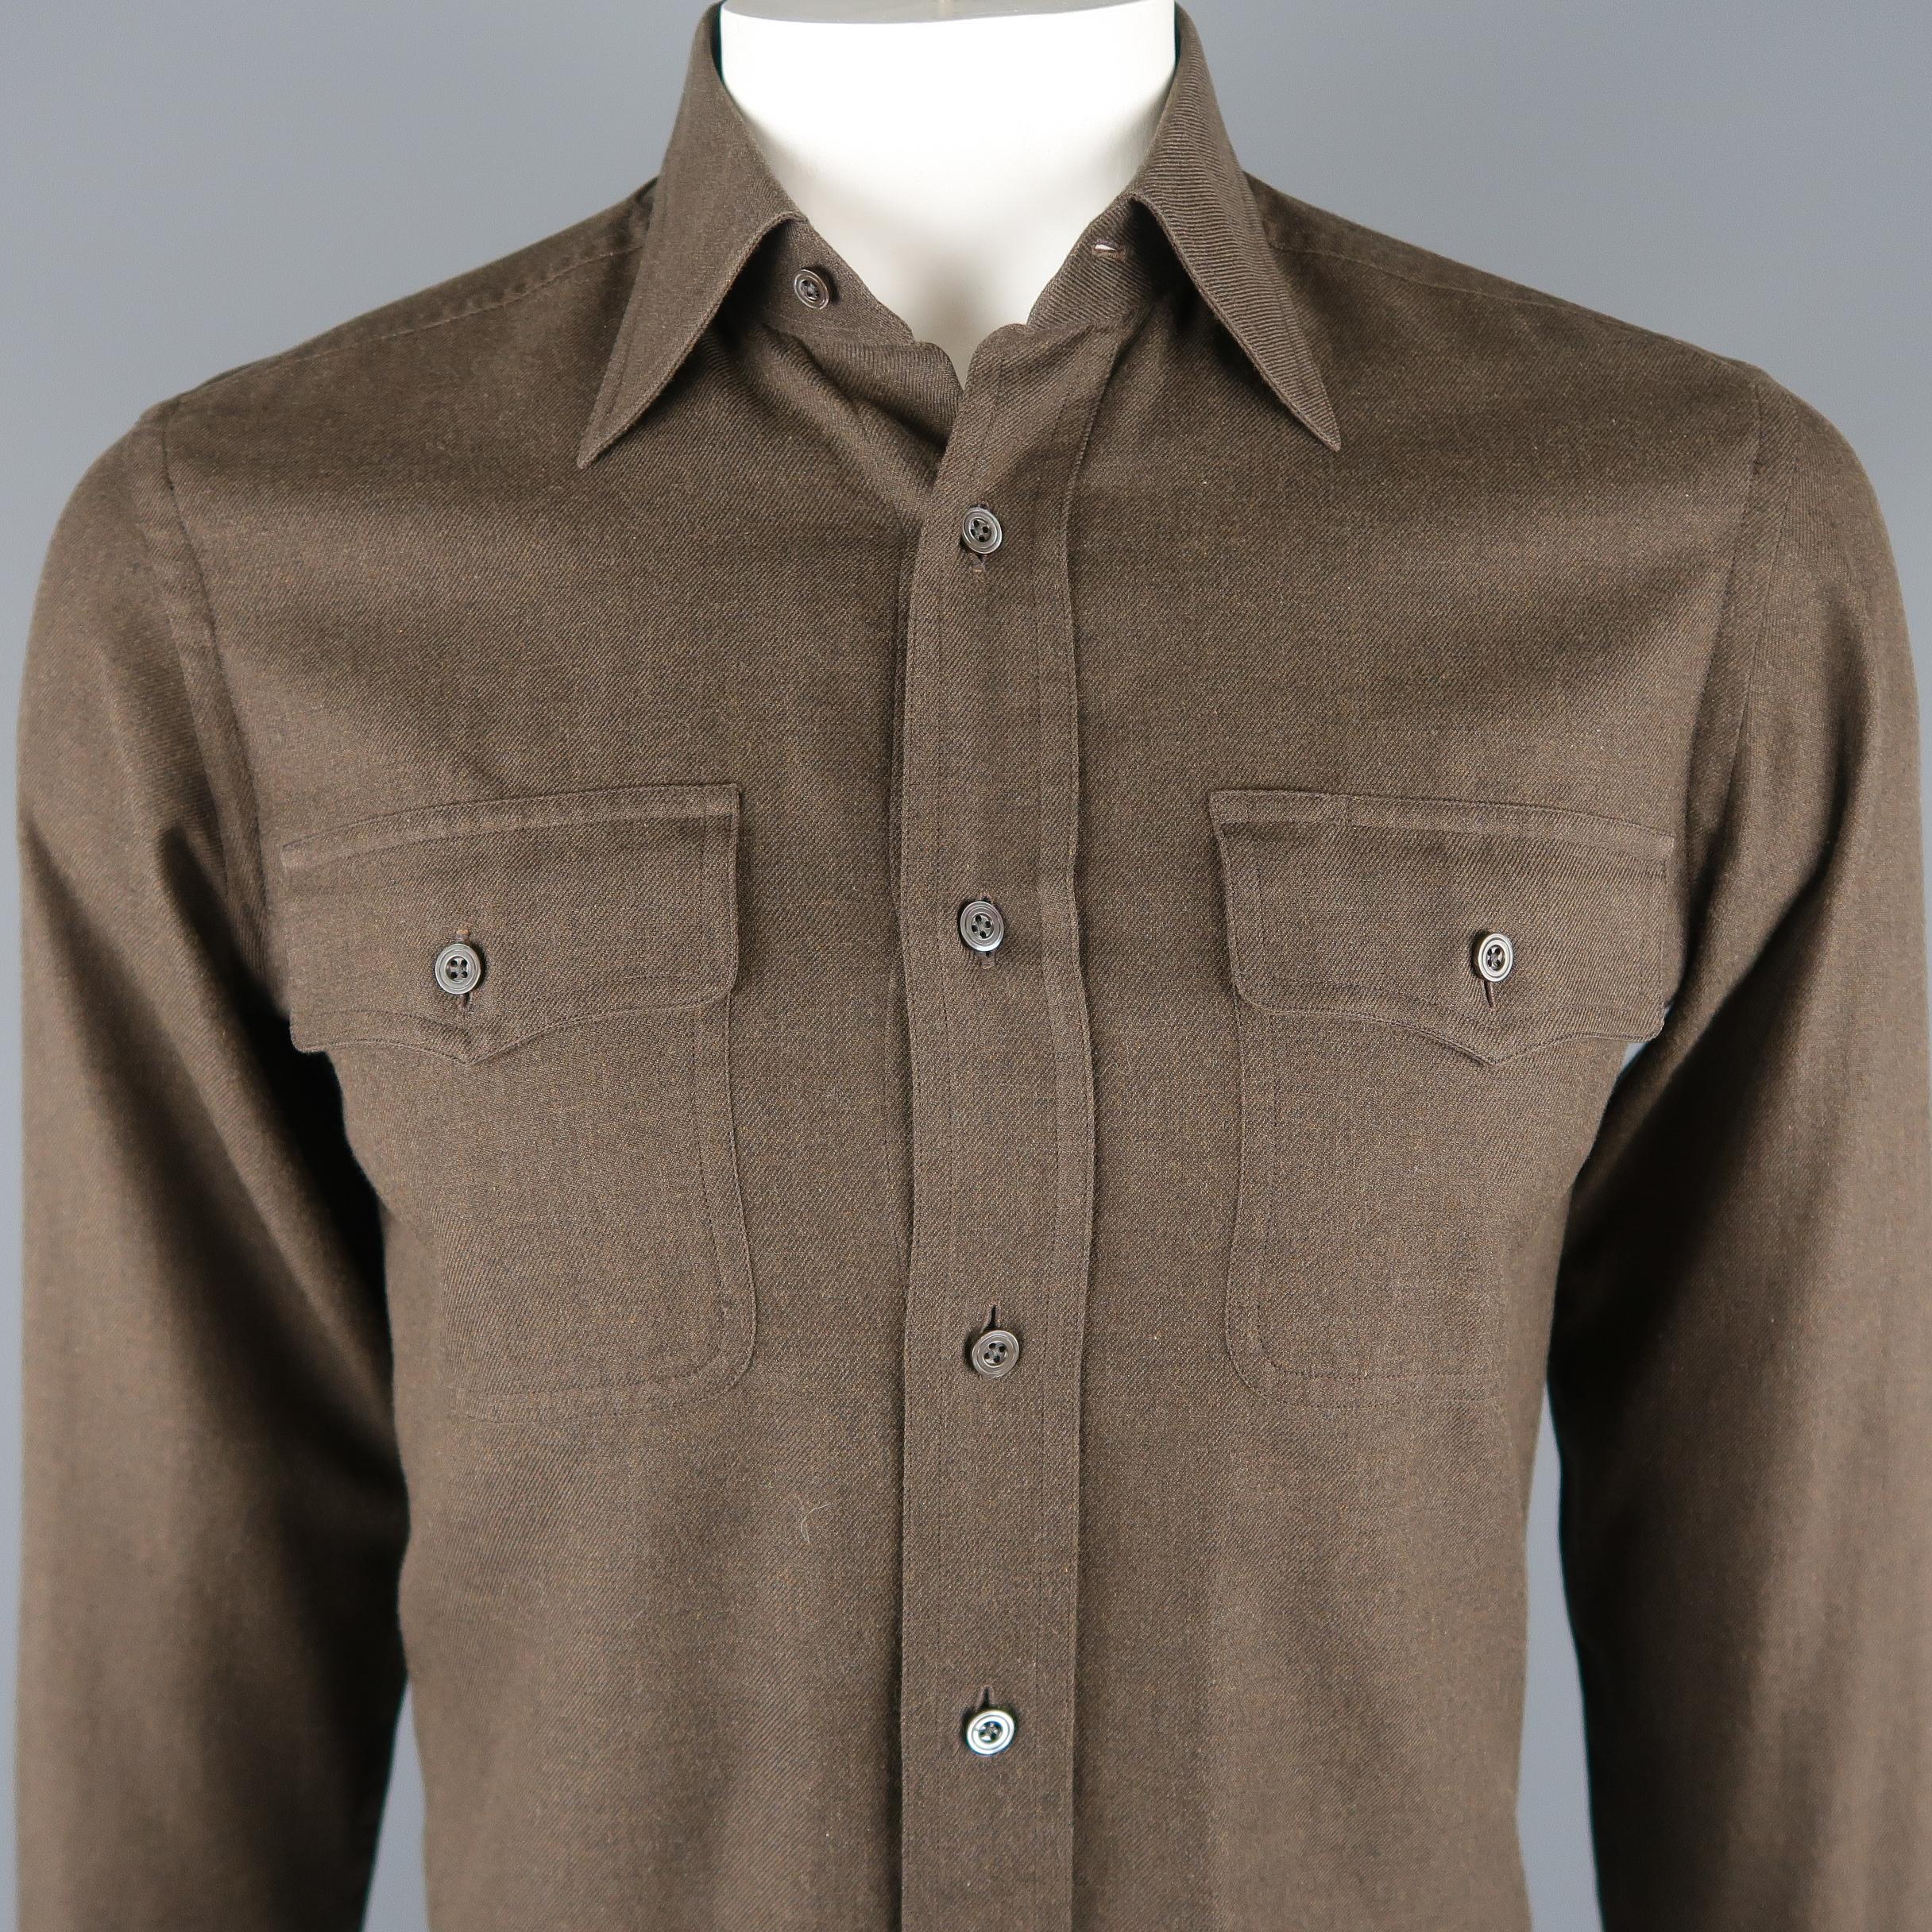 TOM FORD long sleeve shirt come in brown solid cotton fabric, button up and with  front patch pockets. Made in Switzerland.
 
Excellent Pre-Owned Condition.
Marked: 39
 
Measurements:
 
Shoulder: 17 in.
Chest: 42  in.
Sleeve: 27.5  in.
Length: 29.5 